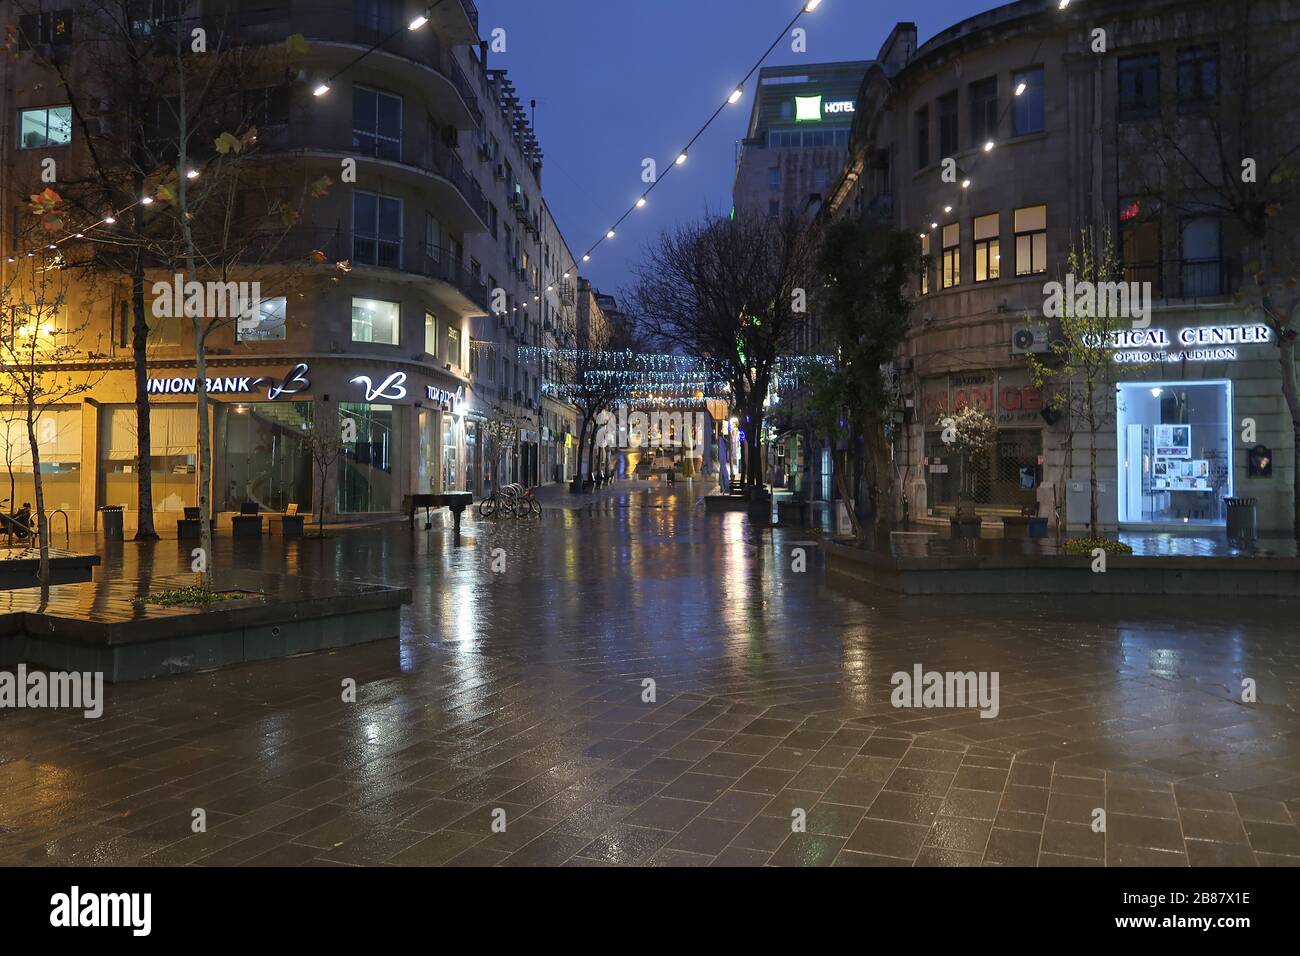 Ben Yehuda a major pedestrian street in Jerusalem is seen empty in the evening during the outbreak of the coronavirus disease (COVID-19) in Israel Stock Photo